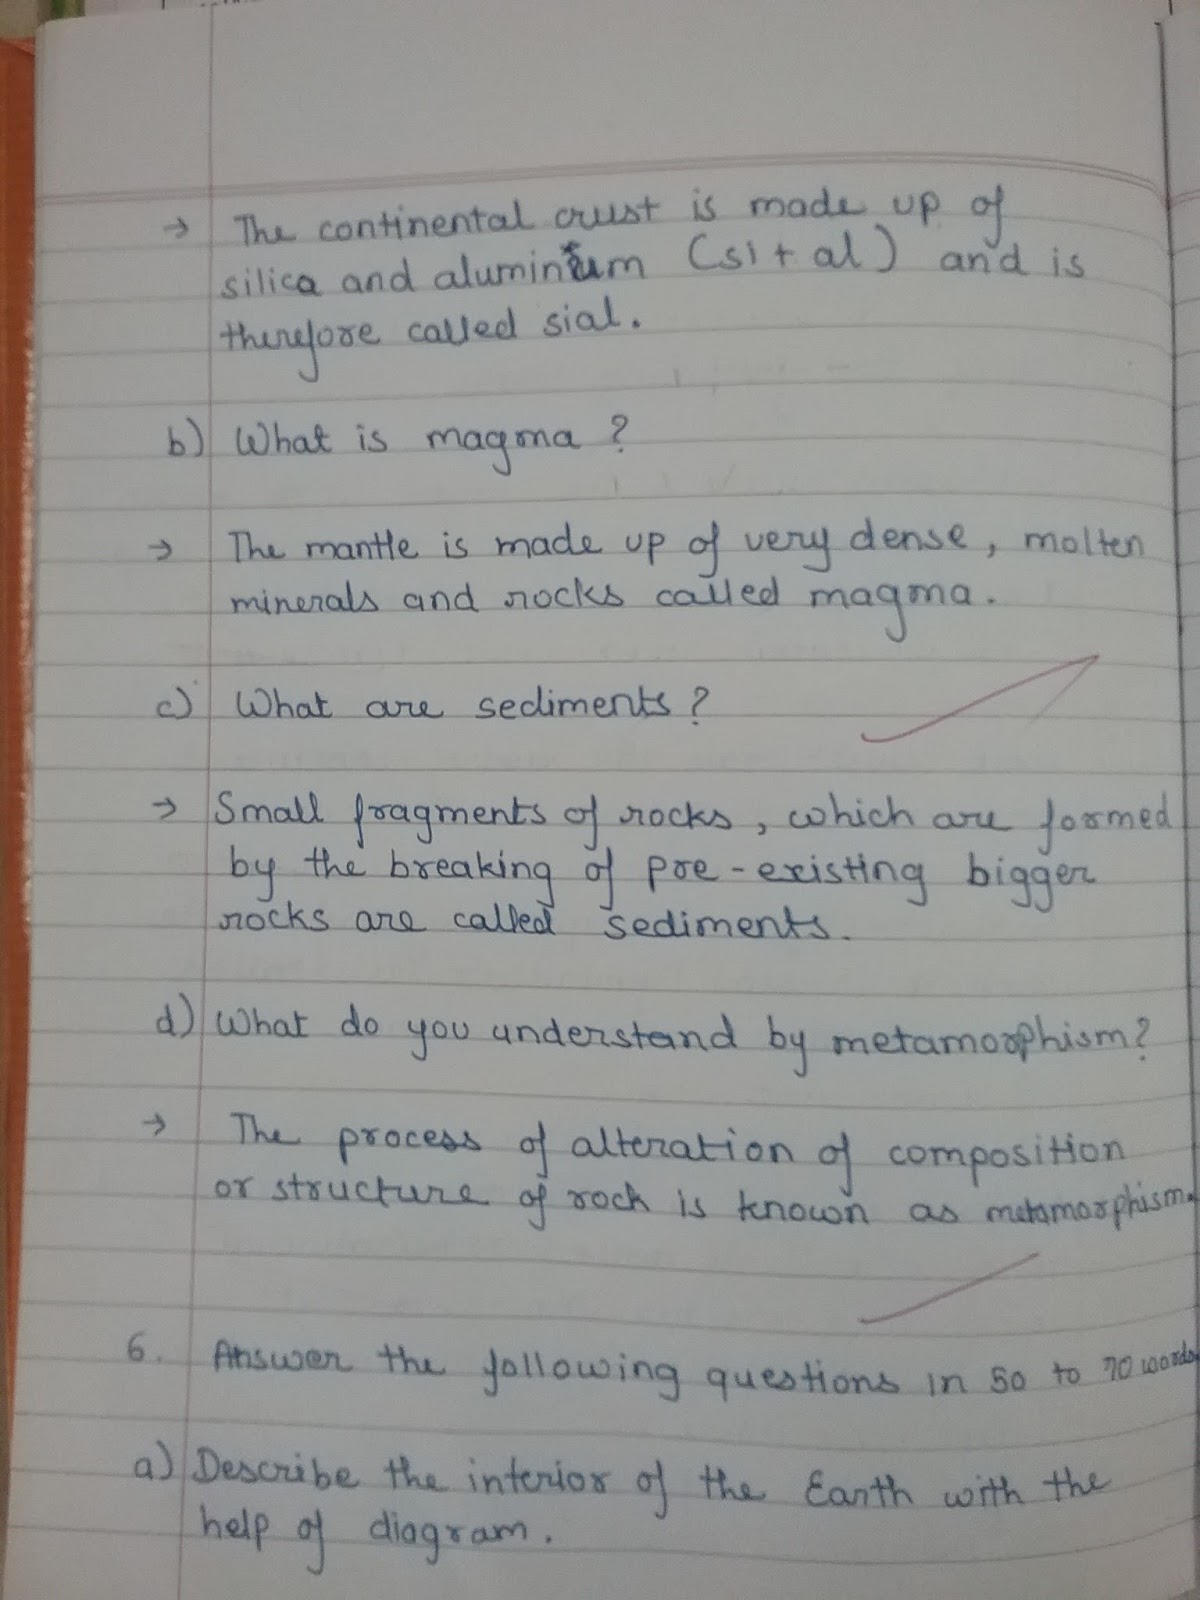 Standard 7 Grade 7 Geography Chp 2 The Interior Of The